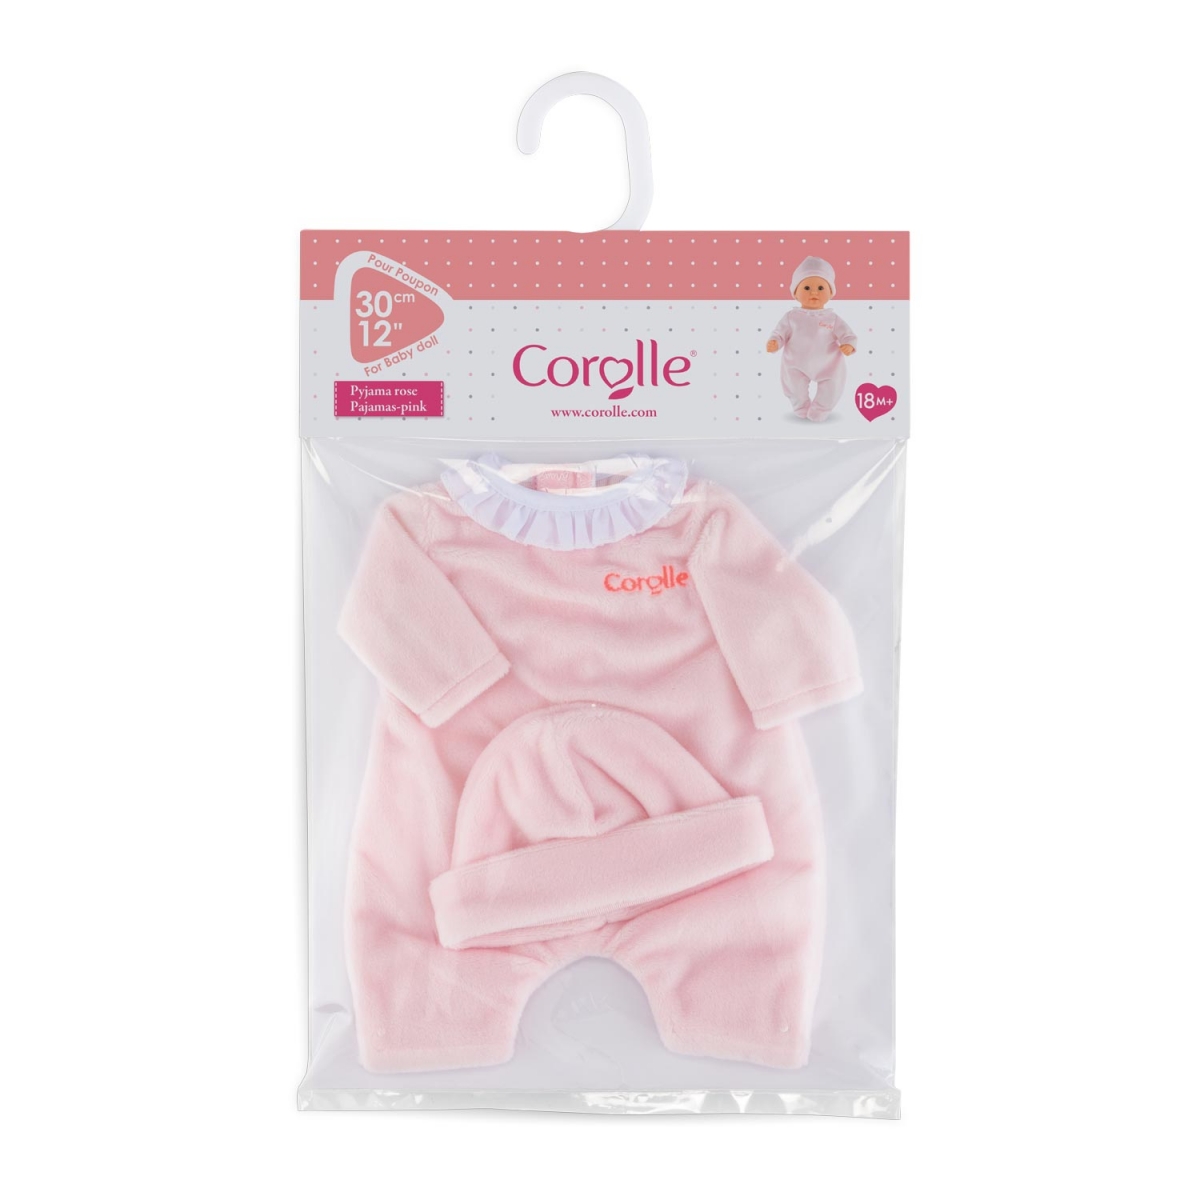 Corolle - , Pink Pajamas for 12-inch baby doll (9000110010)